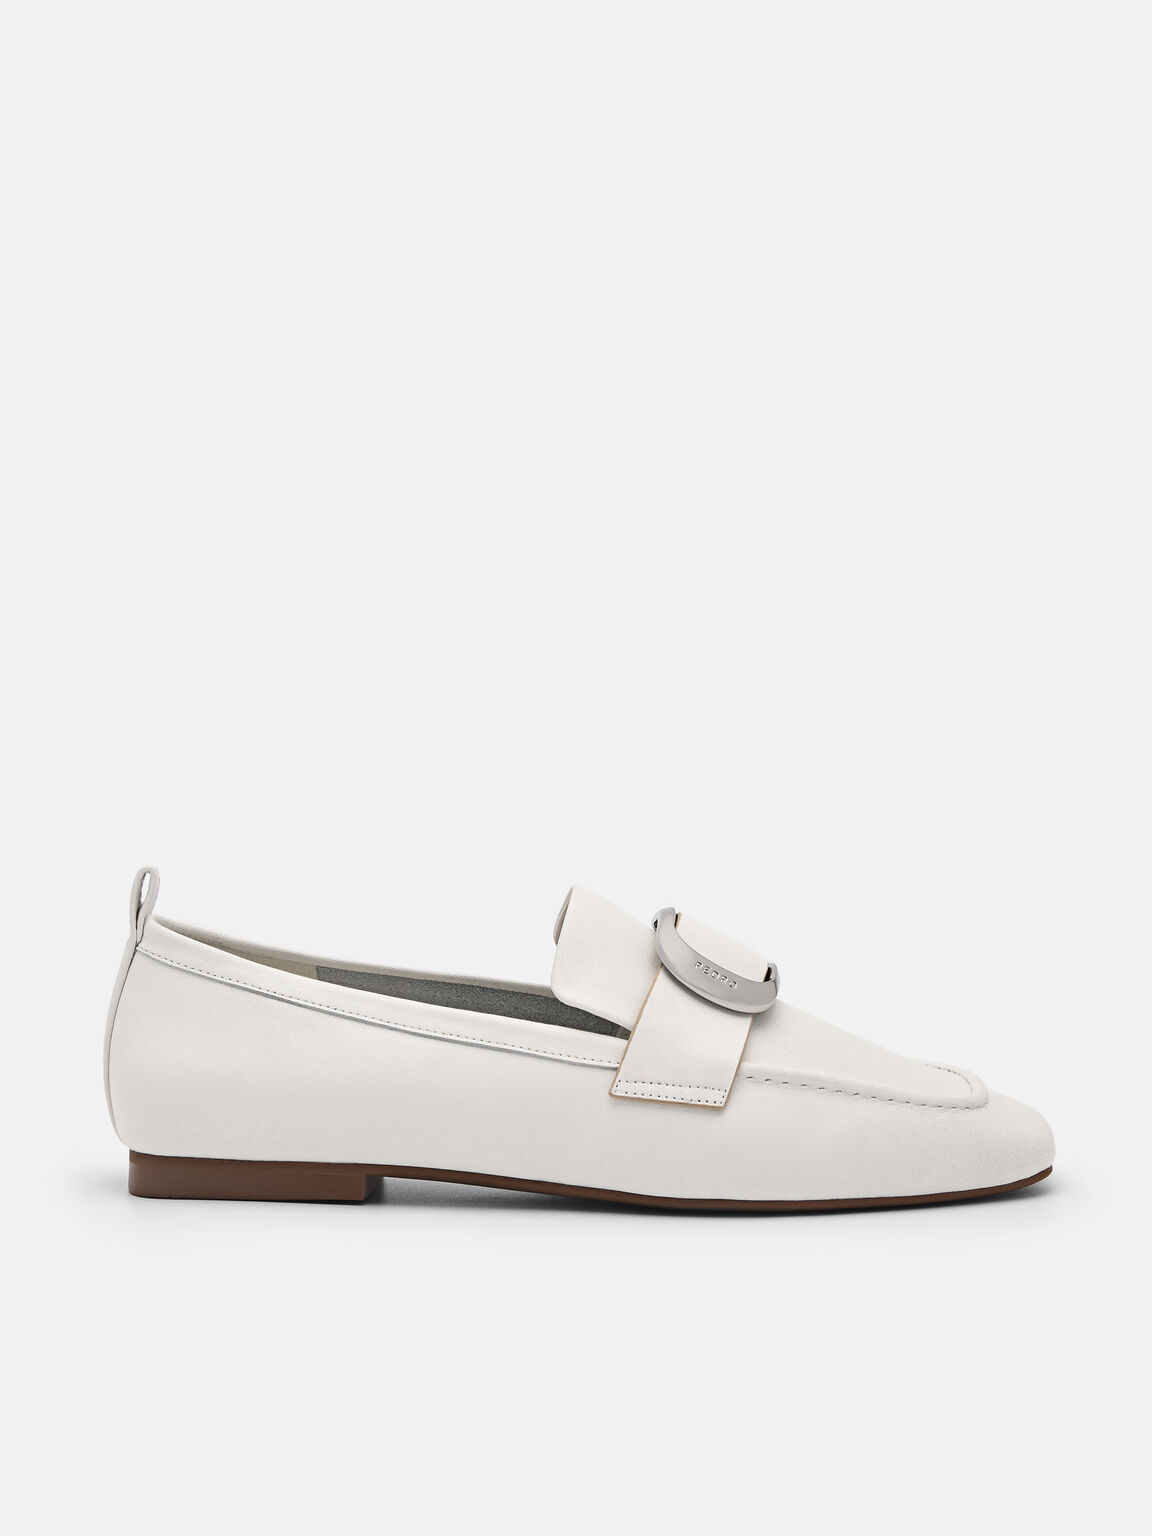 Eden Leather Loafers, White